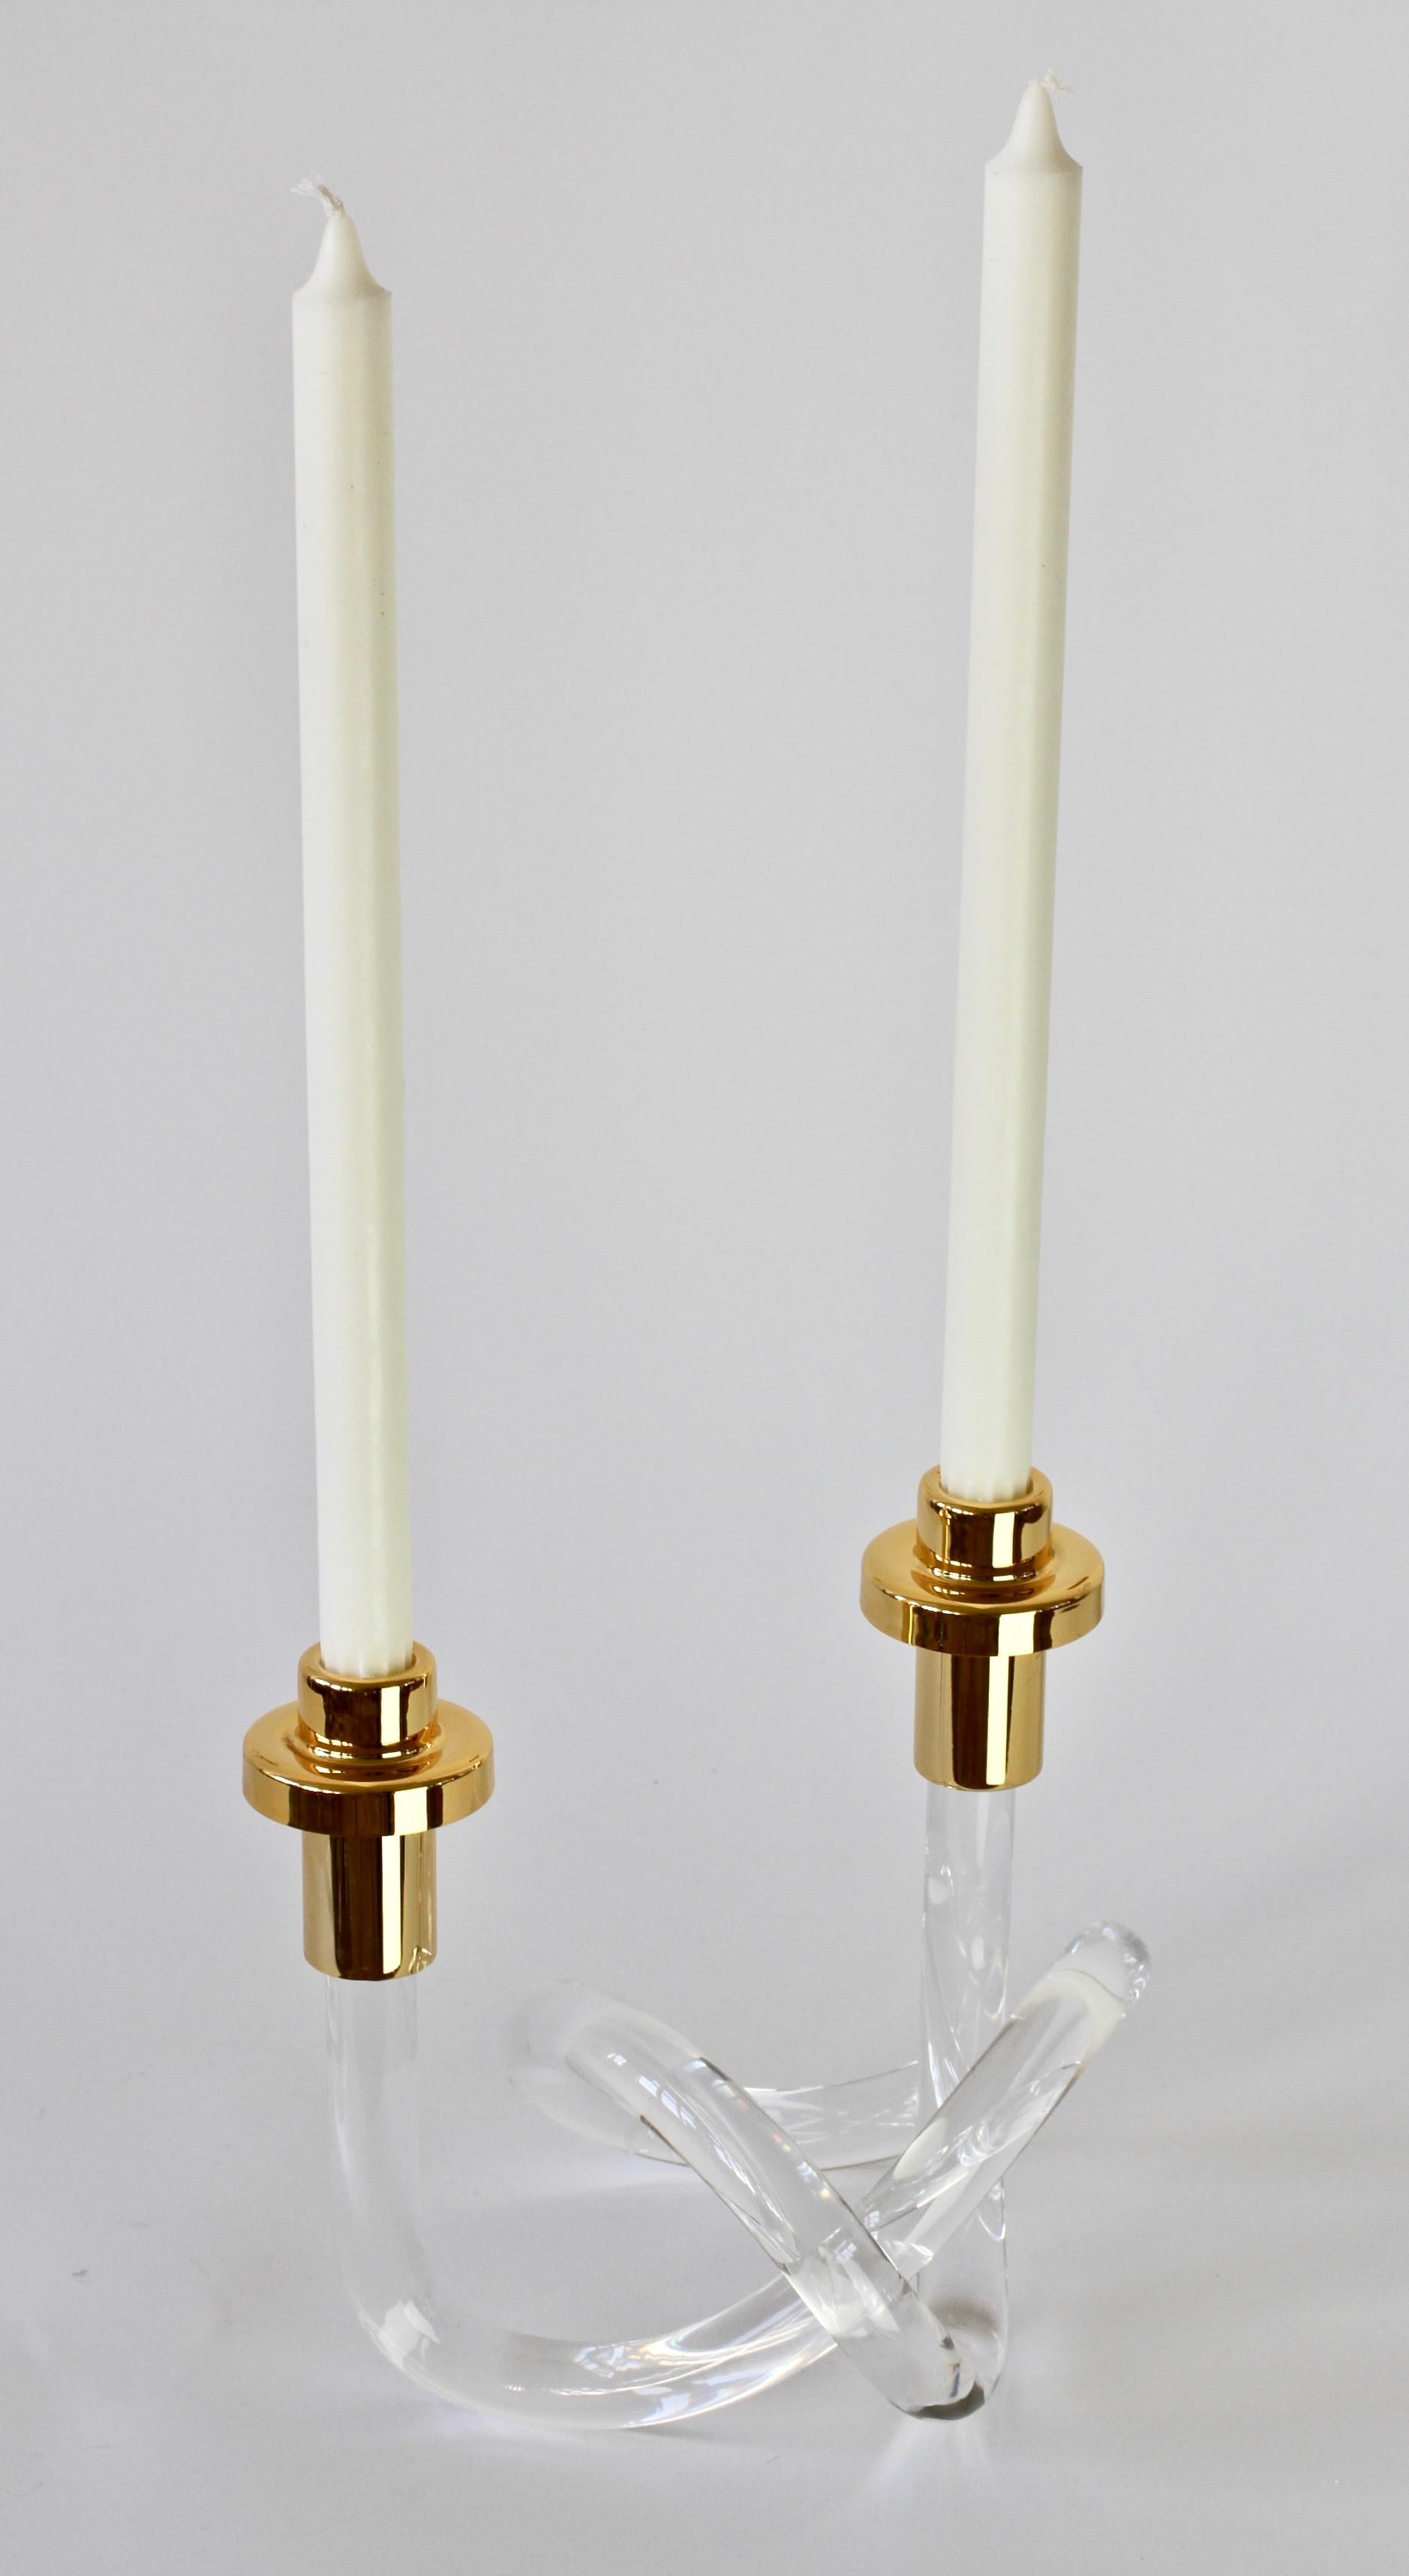 A vintage midcentury Lucite and gold-plated brass double candlestick holder/candelabra designed by Elaine Bscheider for American designer Dorothy Thorpe, circa 1950s. With it's use of a single piece bent and twisted acrylic to form the whimsical